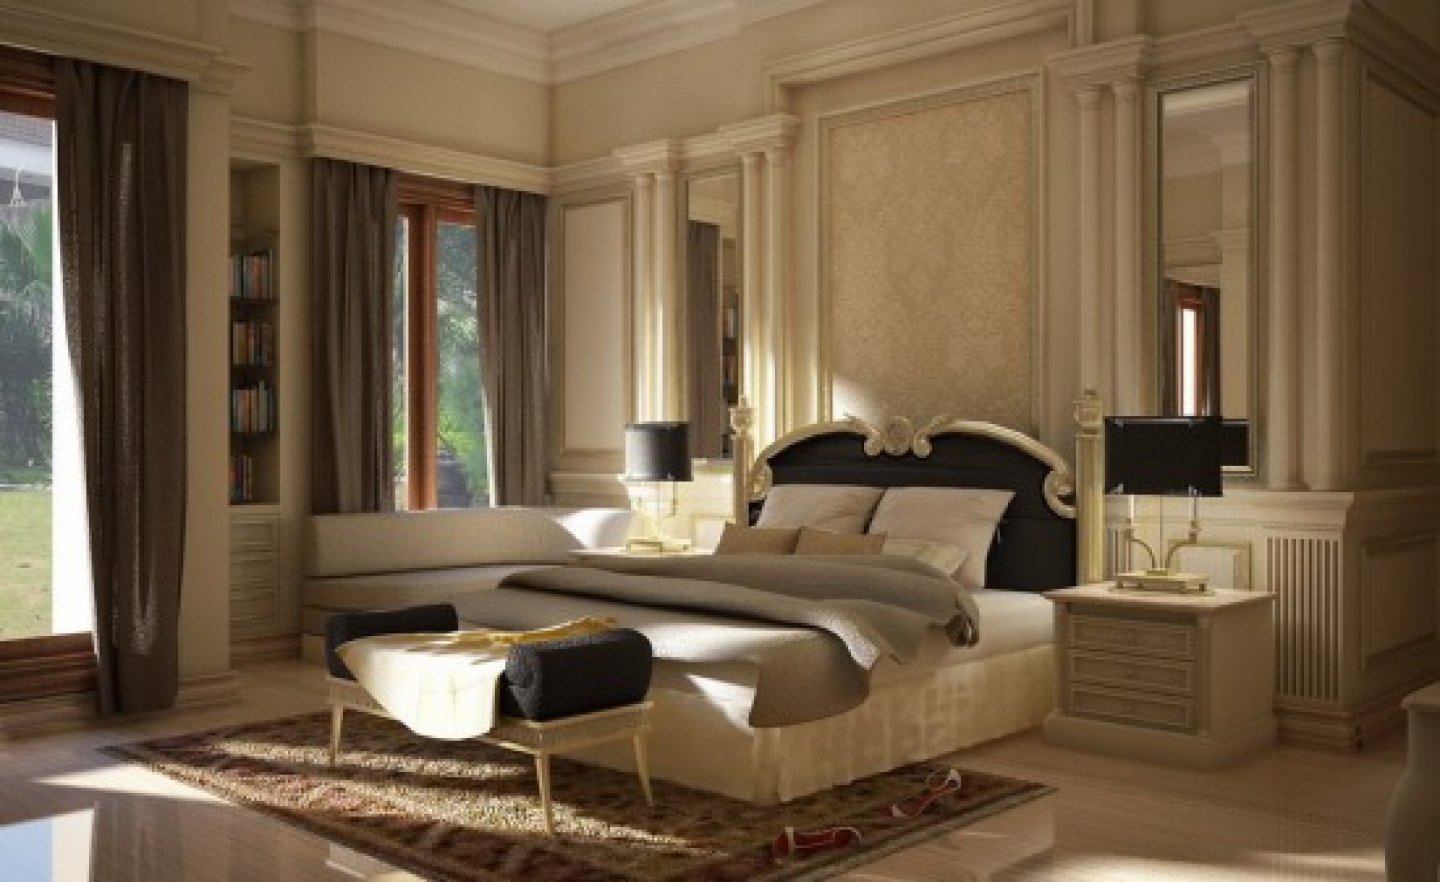 Luxury Room Interior Design For Small Bedroom With Italian Design Style Dark Curtain And WIndow Modern Chair And Set Bedroom Fur And Sandals Varnished FloorPillowLampSet FurnitureBest Wall And Book Bedroom